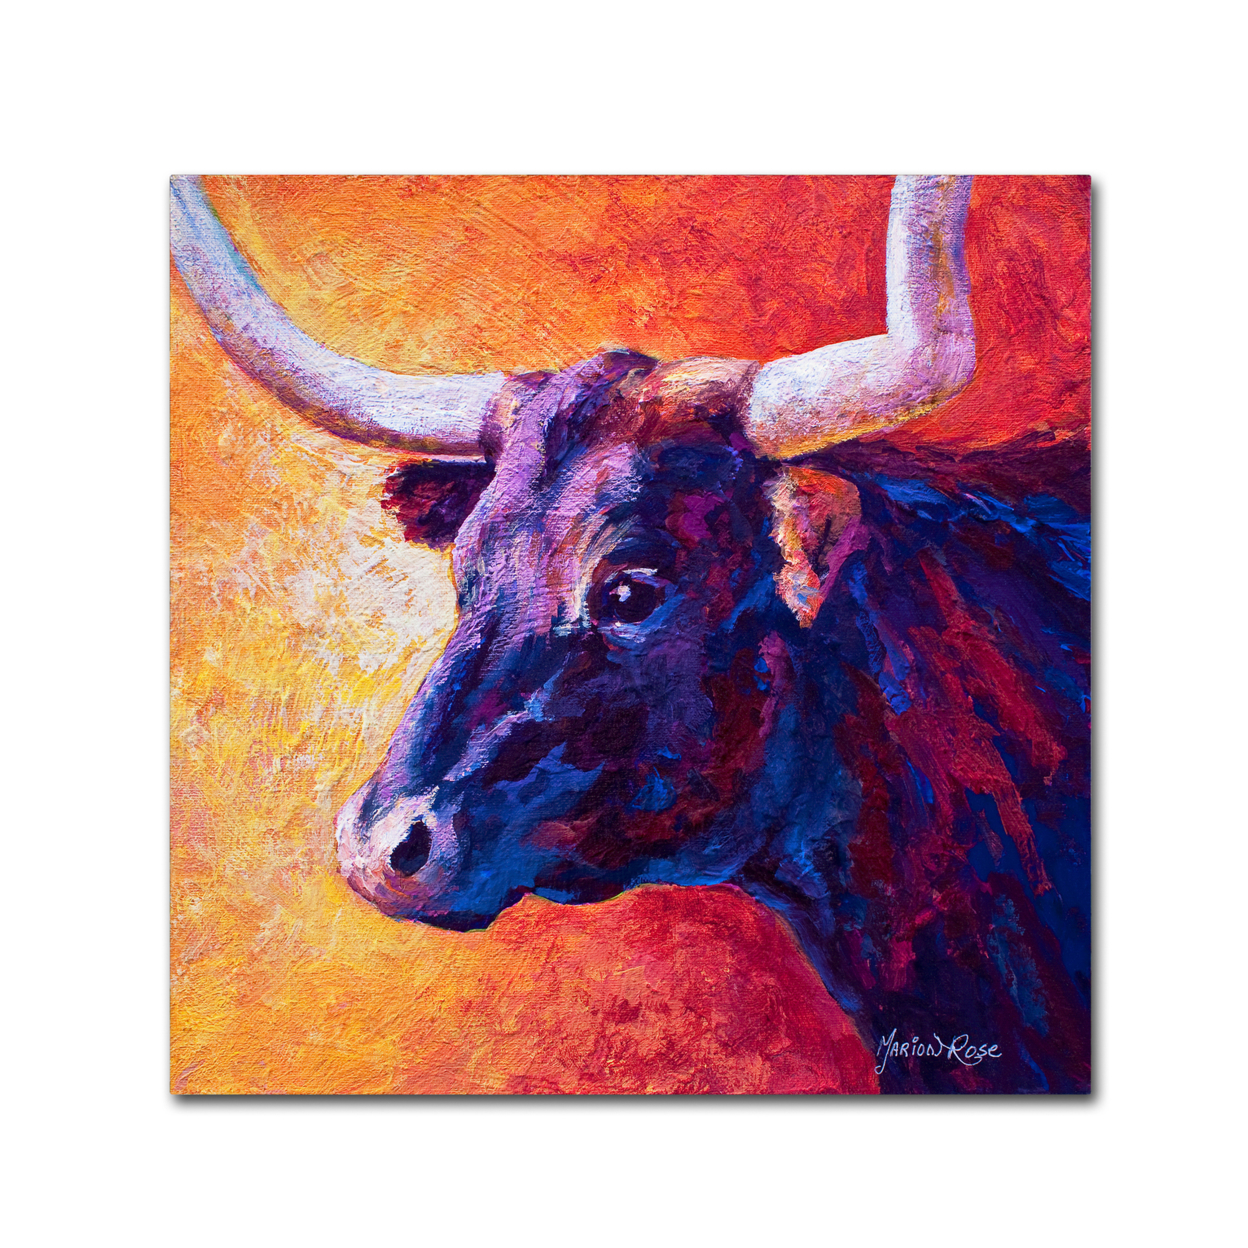 Marion Rose 'Violet Cow' Ready To Hang Canvas Art 24 X 24 Inches Made In USA